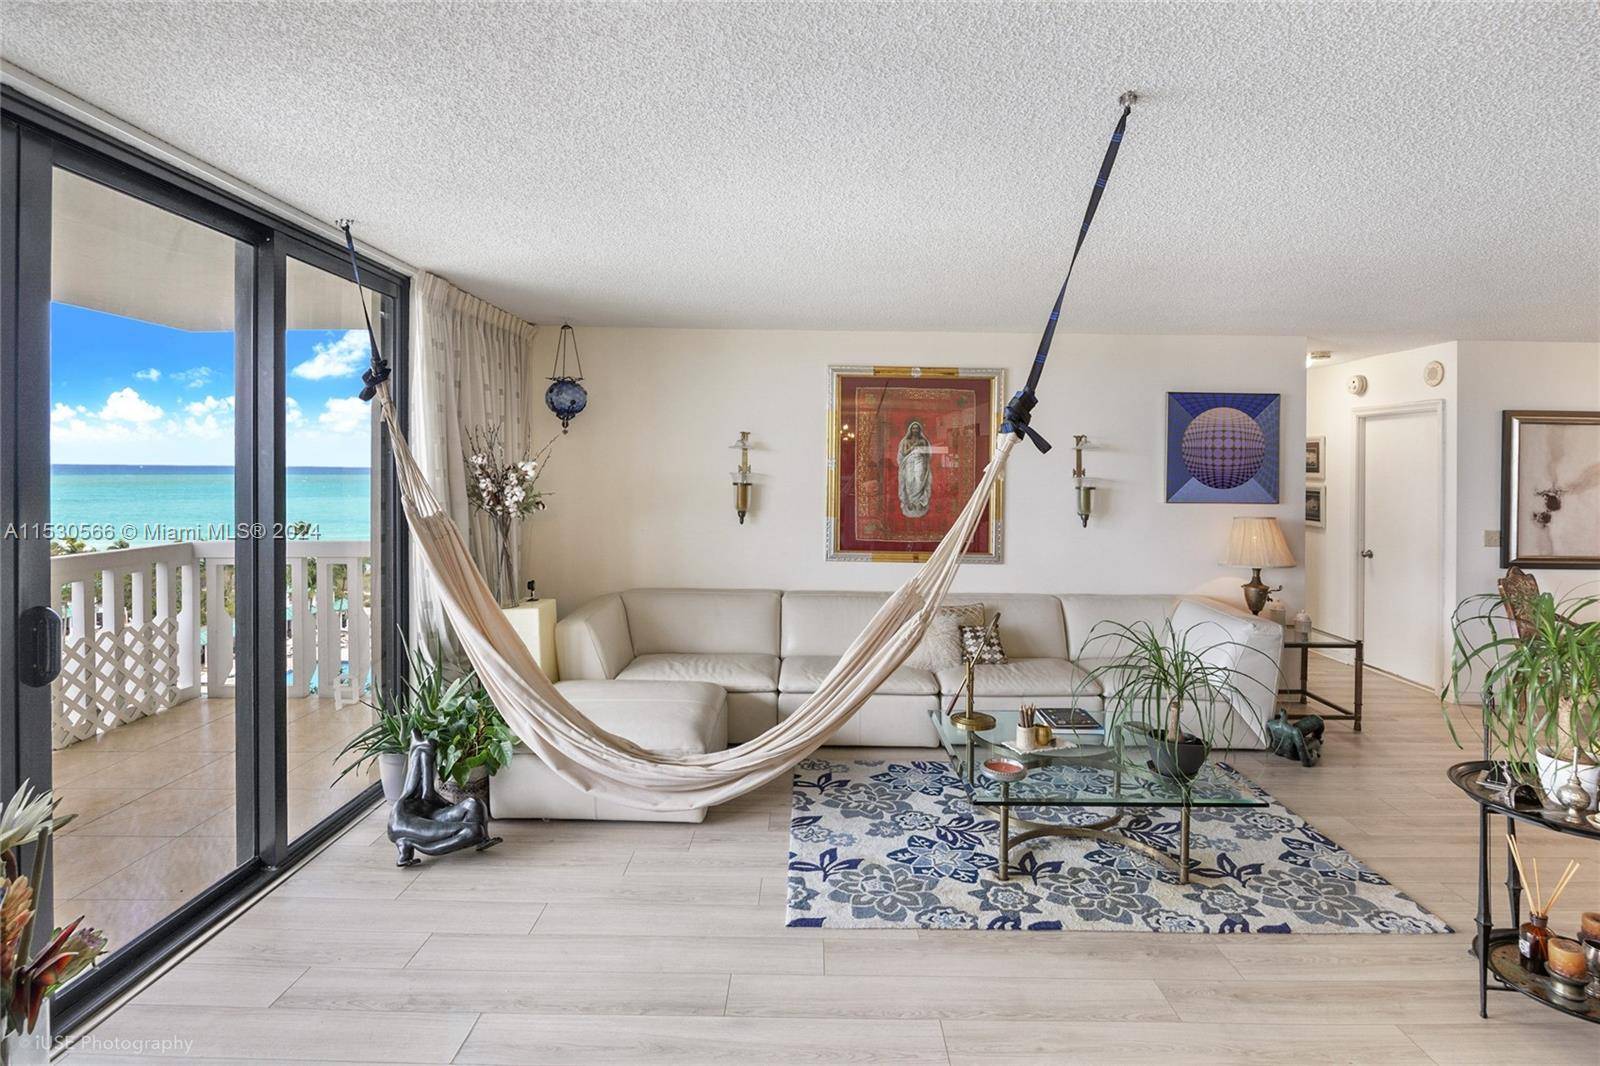 Balmoral condo Unit 10K, the only unit with 1, 775 SqFt with city and Ocean views, in the heart of the action, across the street from the prestigious Bal Harbour ...